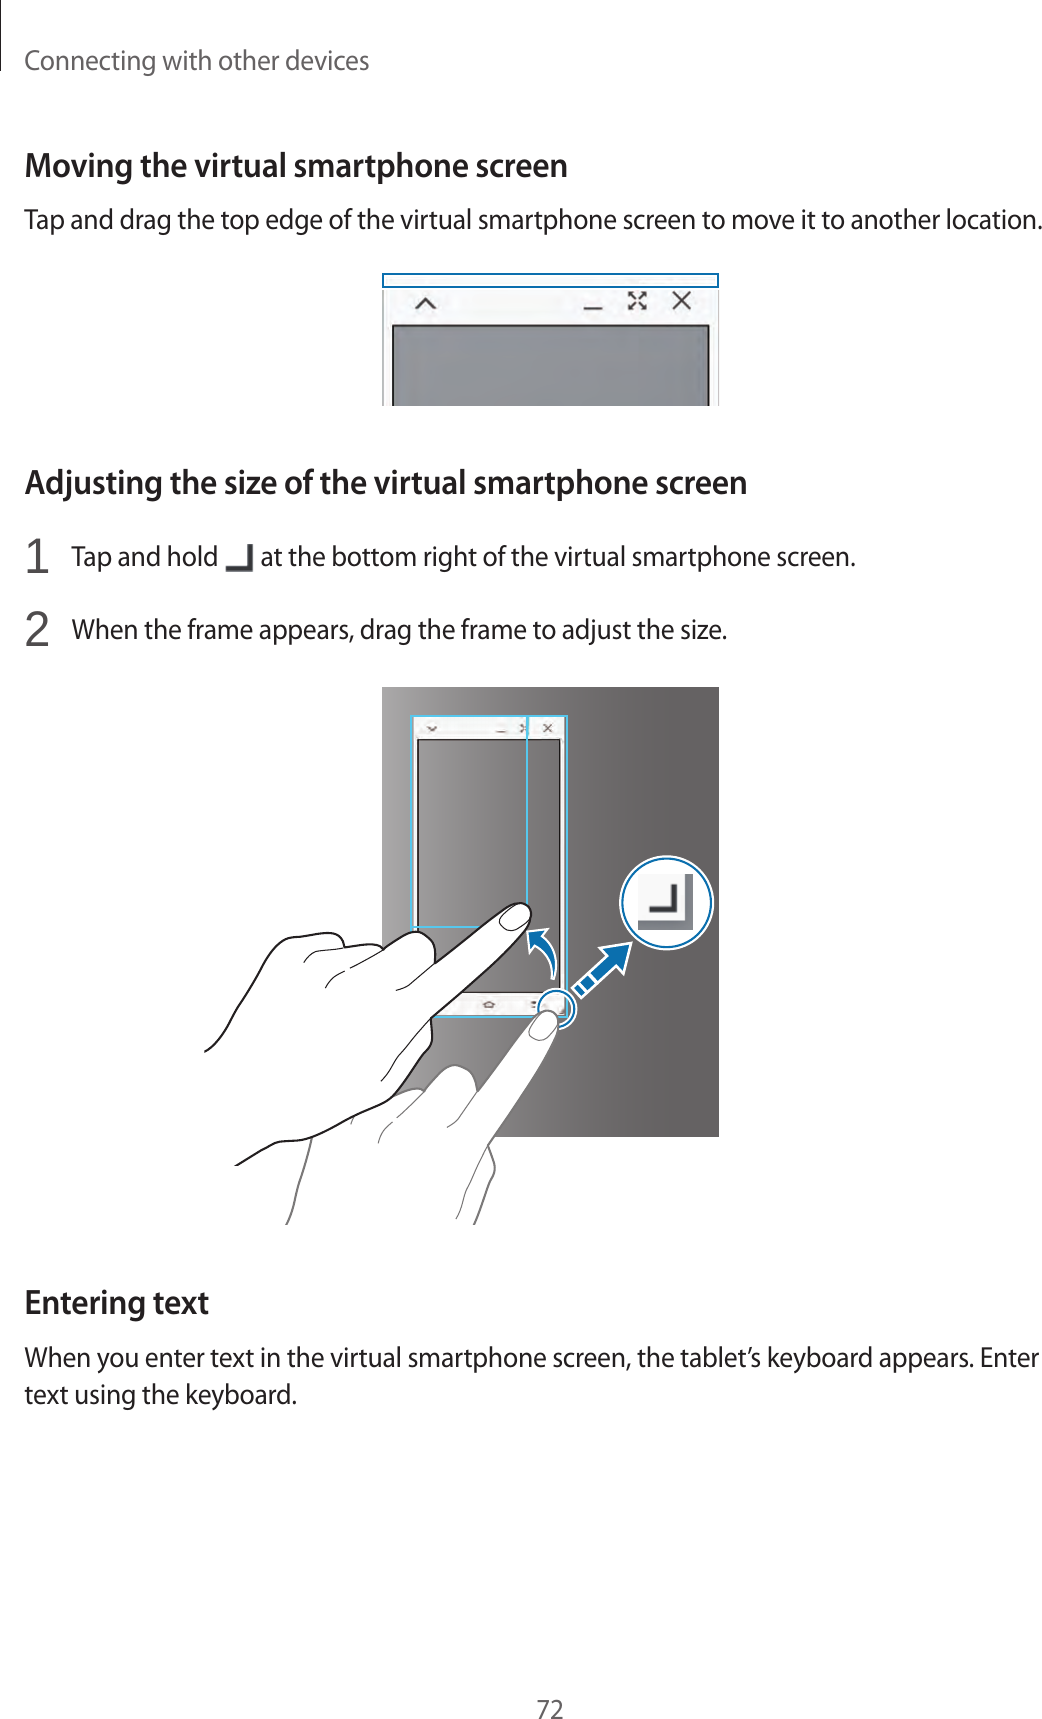 Connecting with other devices72Moving the virtual smartphone screenTap and drag the top edge of the virtual smartphone screen to move it to another location.Adjusting the size of the virtual smartphone screen1  Tap and hold   at the bottom right of the virtual smartphone screen.2  When the frame appears, drag the frame to adjust the size.  Entering textWhen you enter text in the virtual smartphone screen, the tablet’s keyboard appears. Enter text using the keyboard.